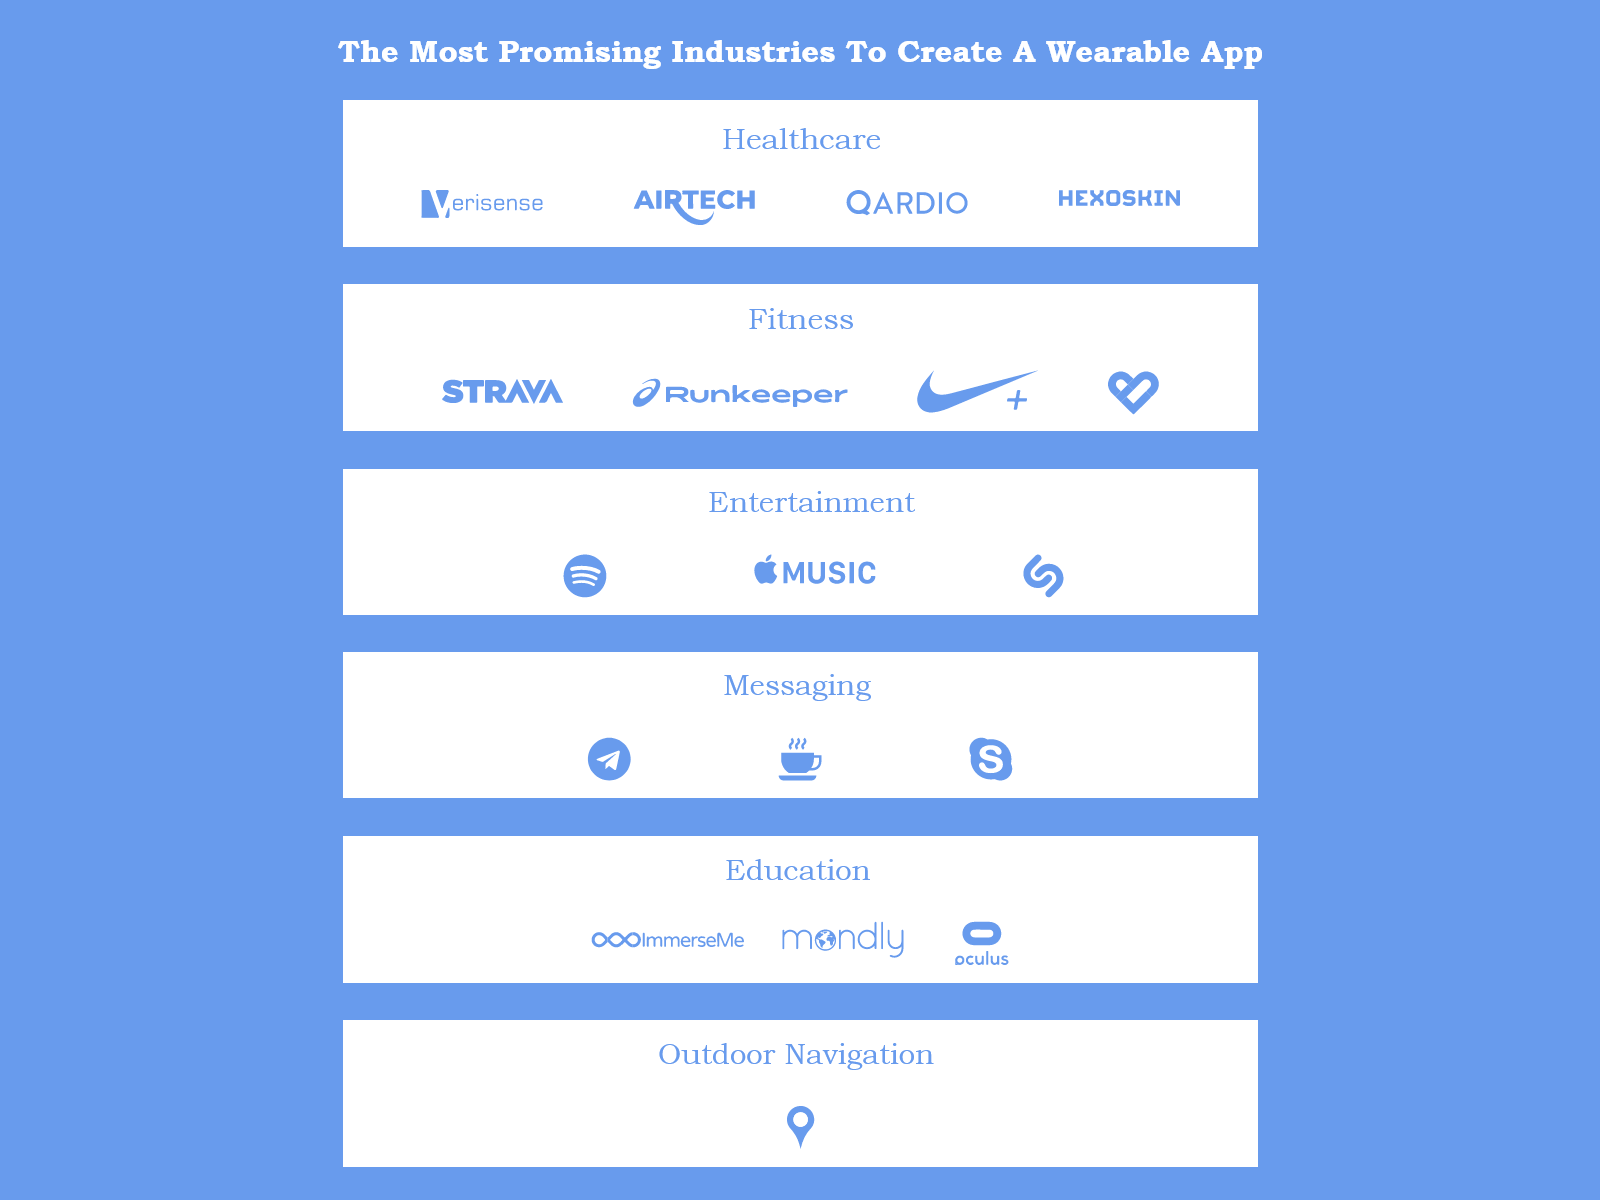 The Most Promising Industries to Create Wearable App